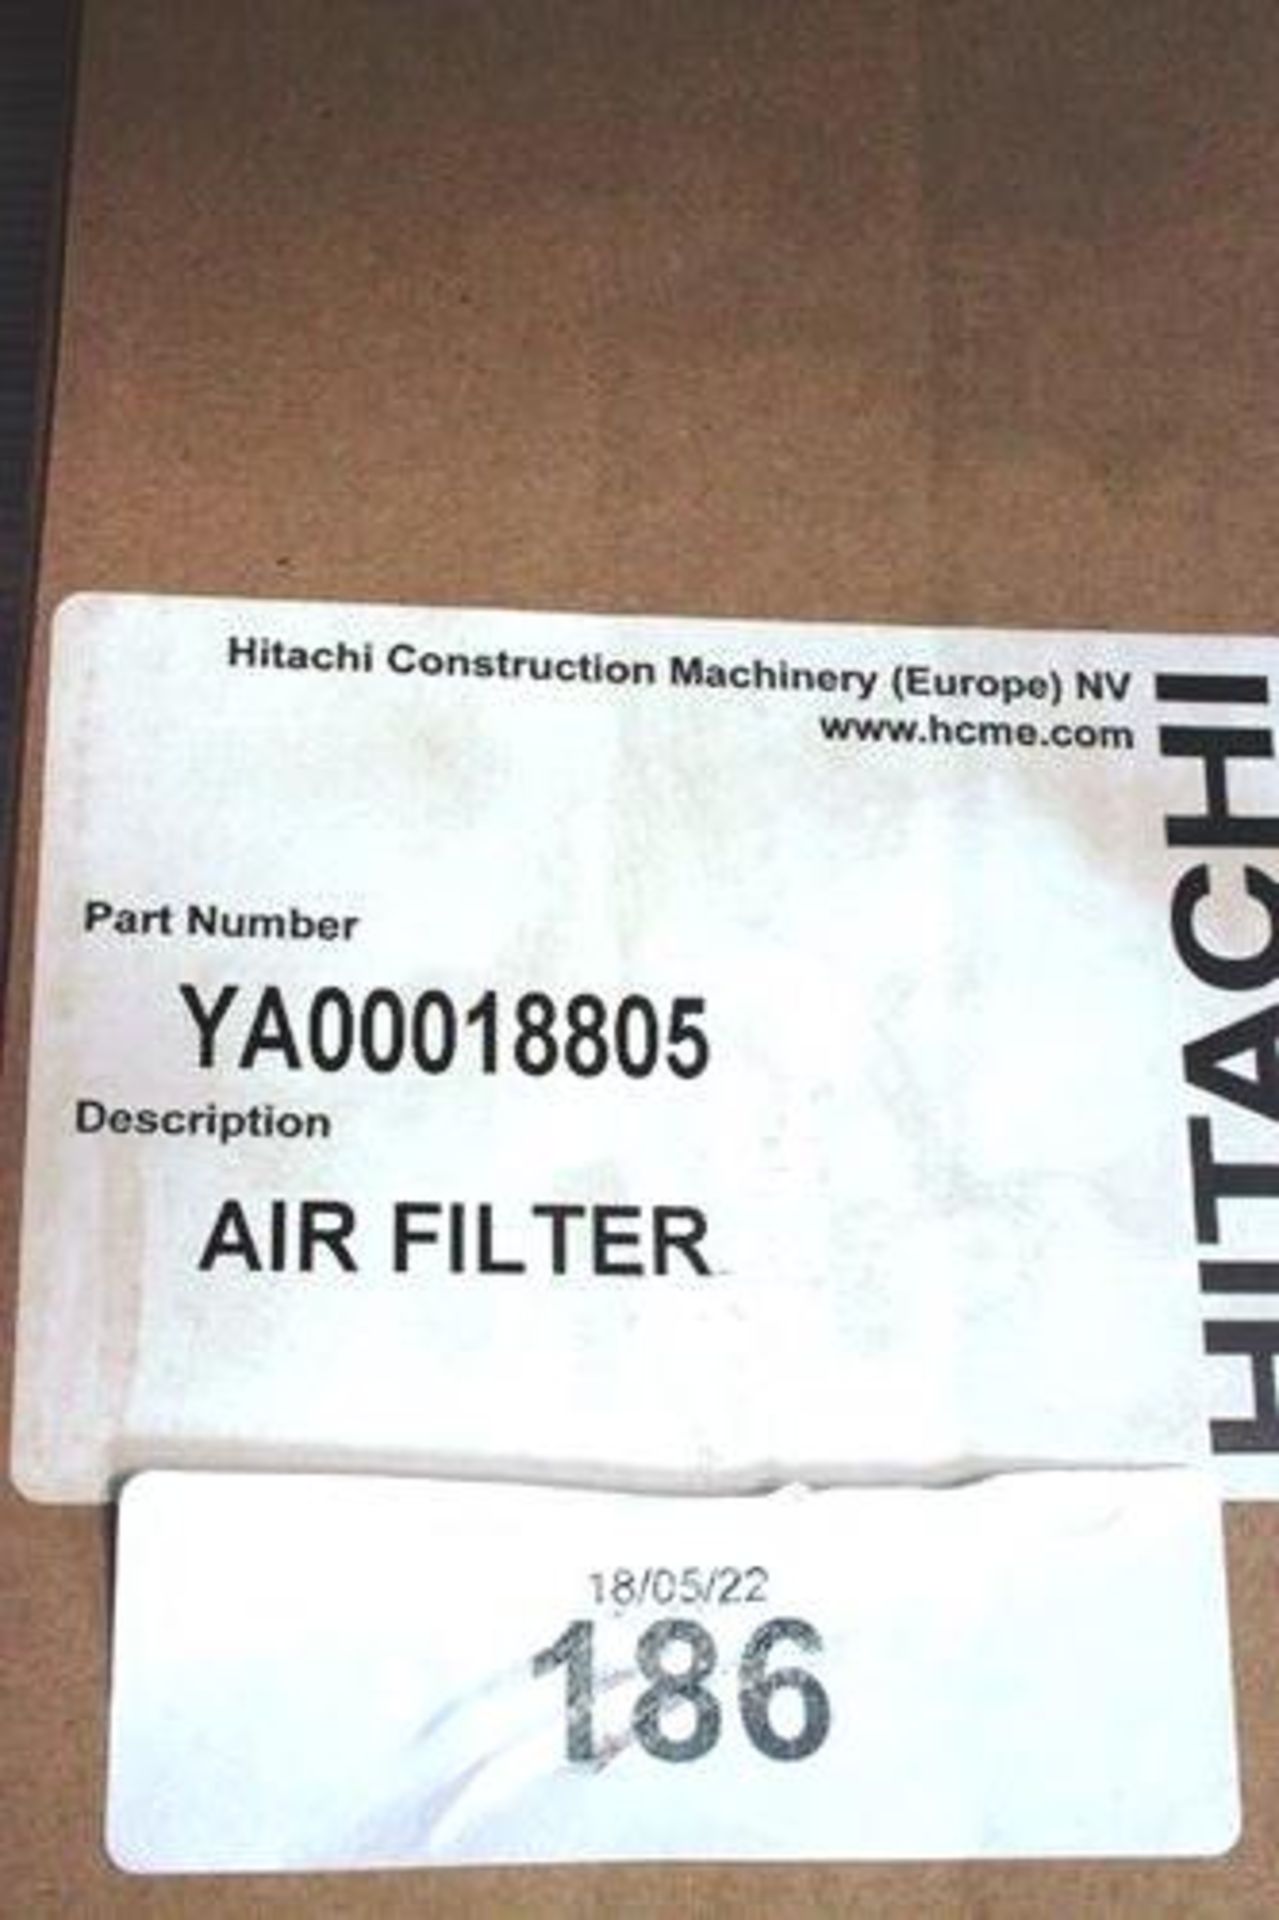 3 x Hitachi direct flow primary filters, Ref: YA00018804 and 3 x Hitachi air filters, Ref: